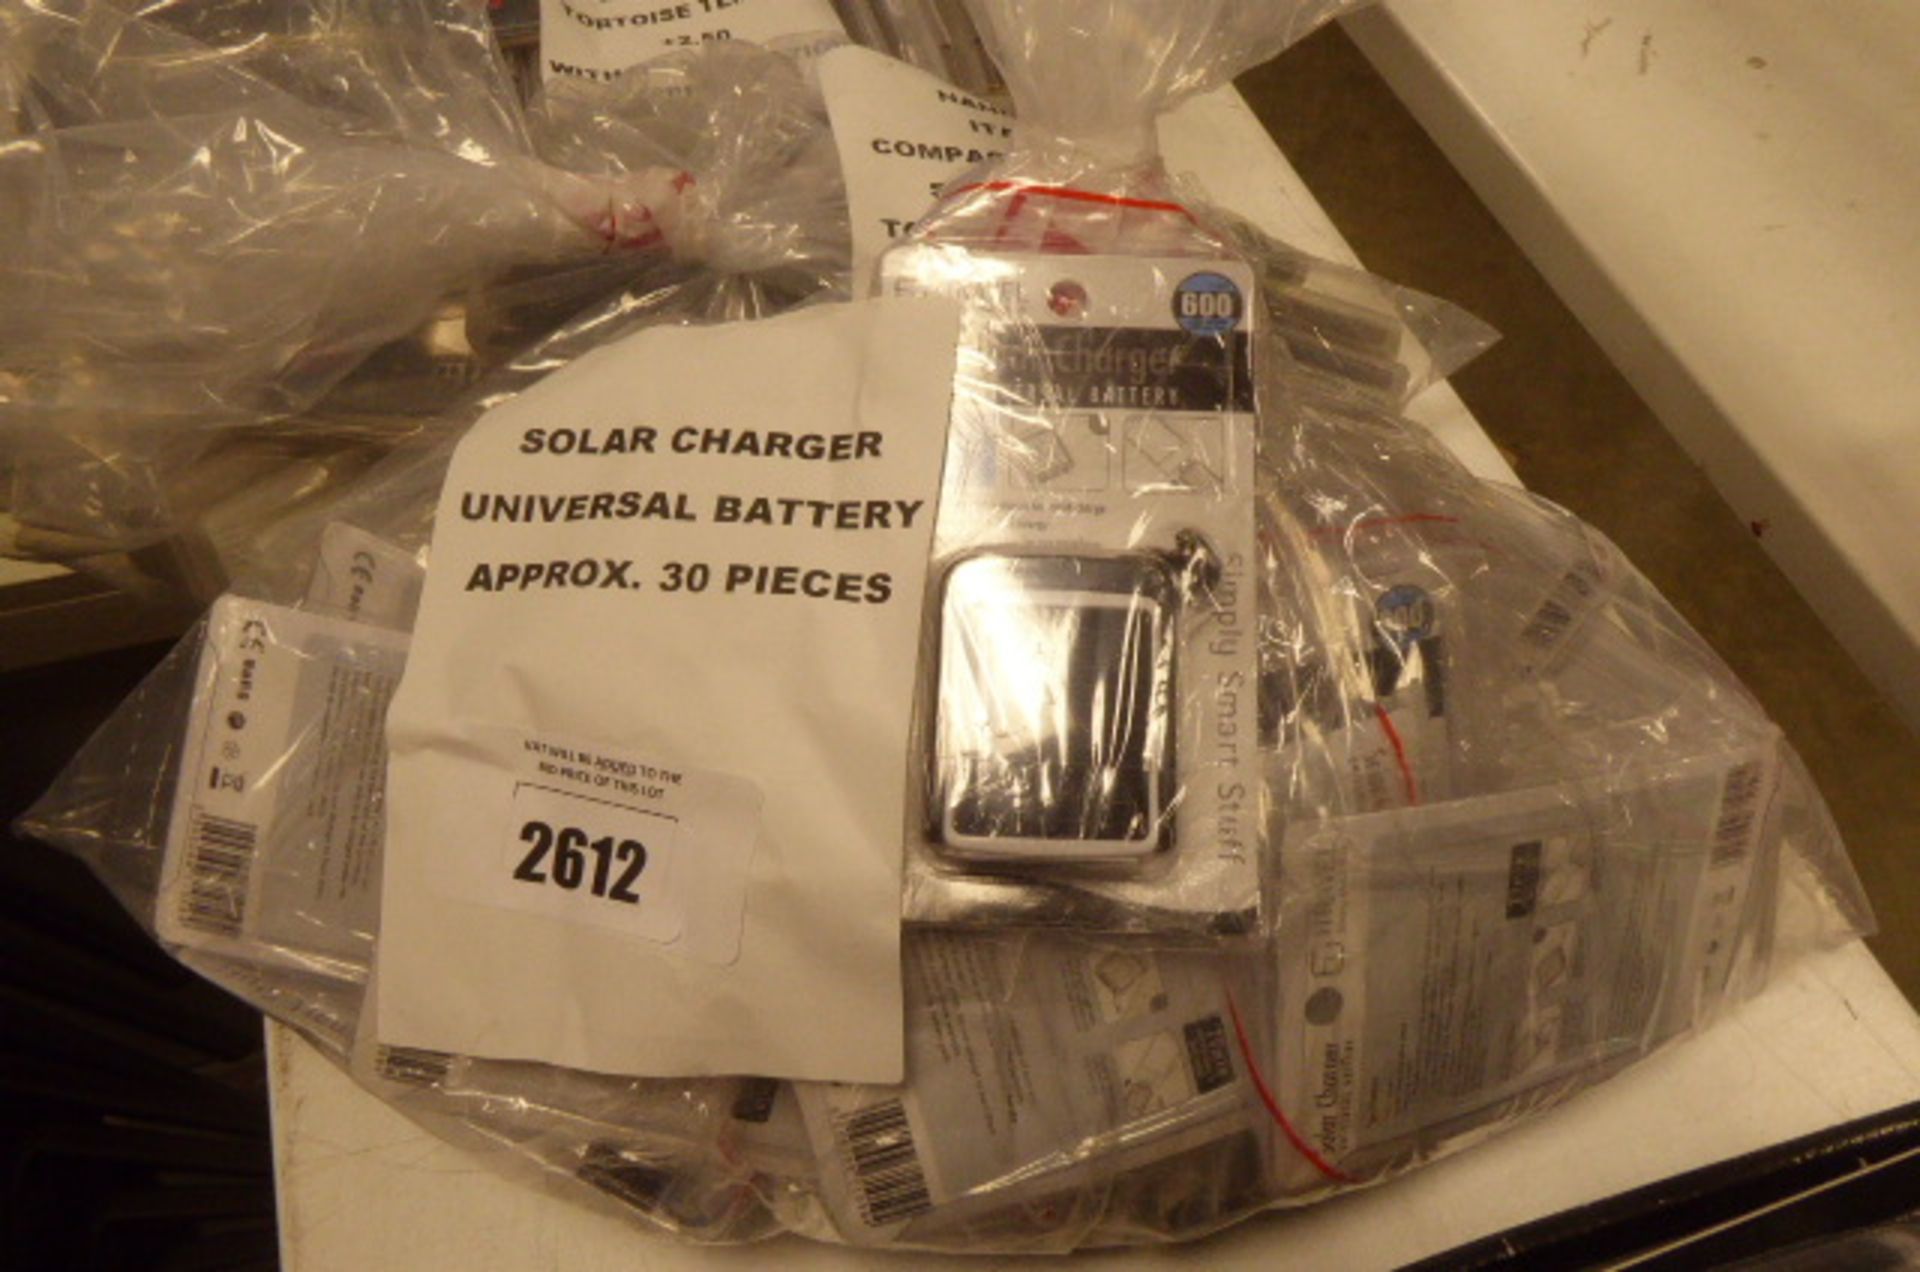 Solar charger and battery (approx 30 pieces in bag)